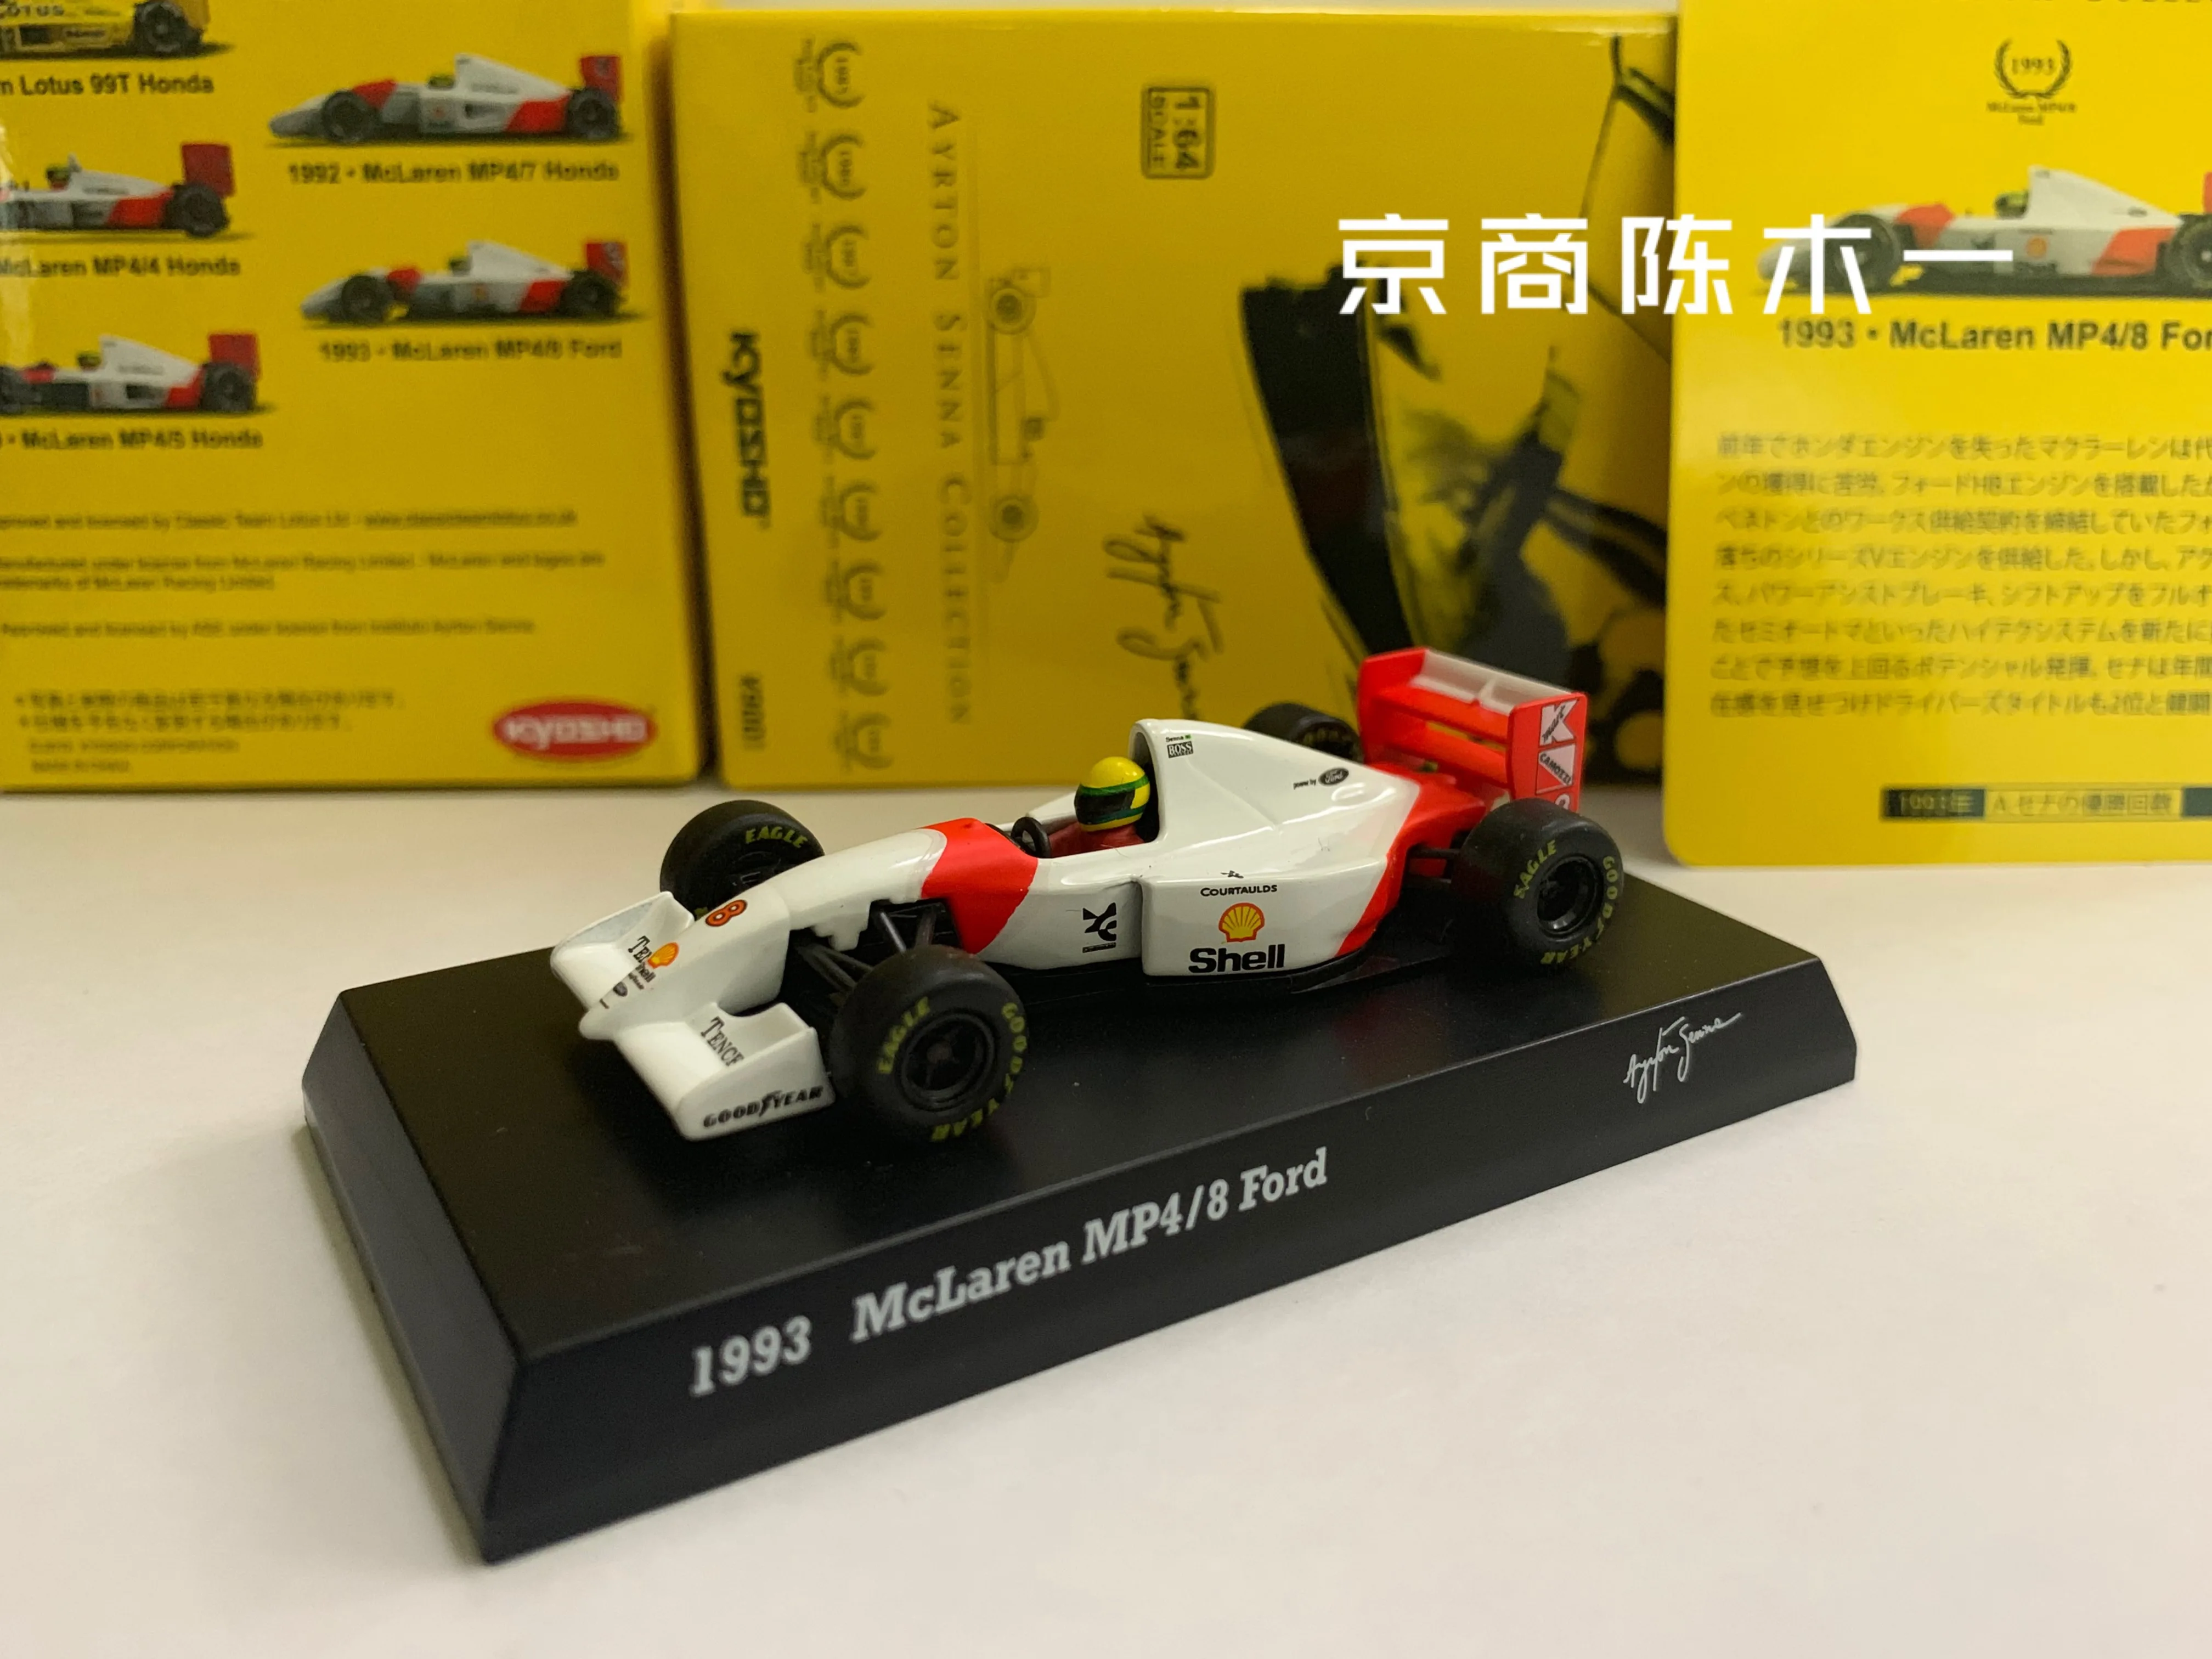 1-64-kyosho-mclaren-mp4-8-ford-f1-1993-8-ayrton-senna-collection-of-die-cast-alloy-trolley-model-ornaments